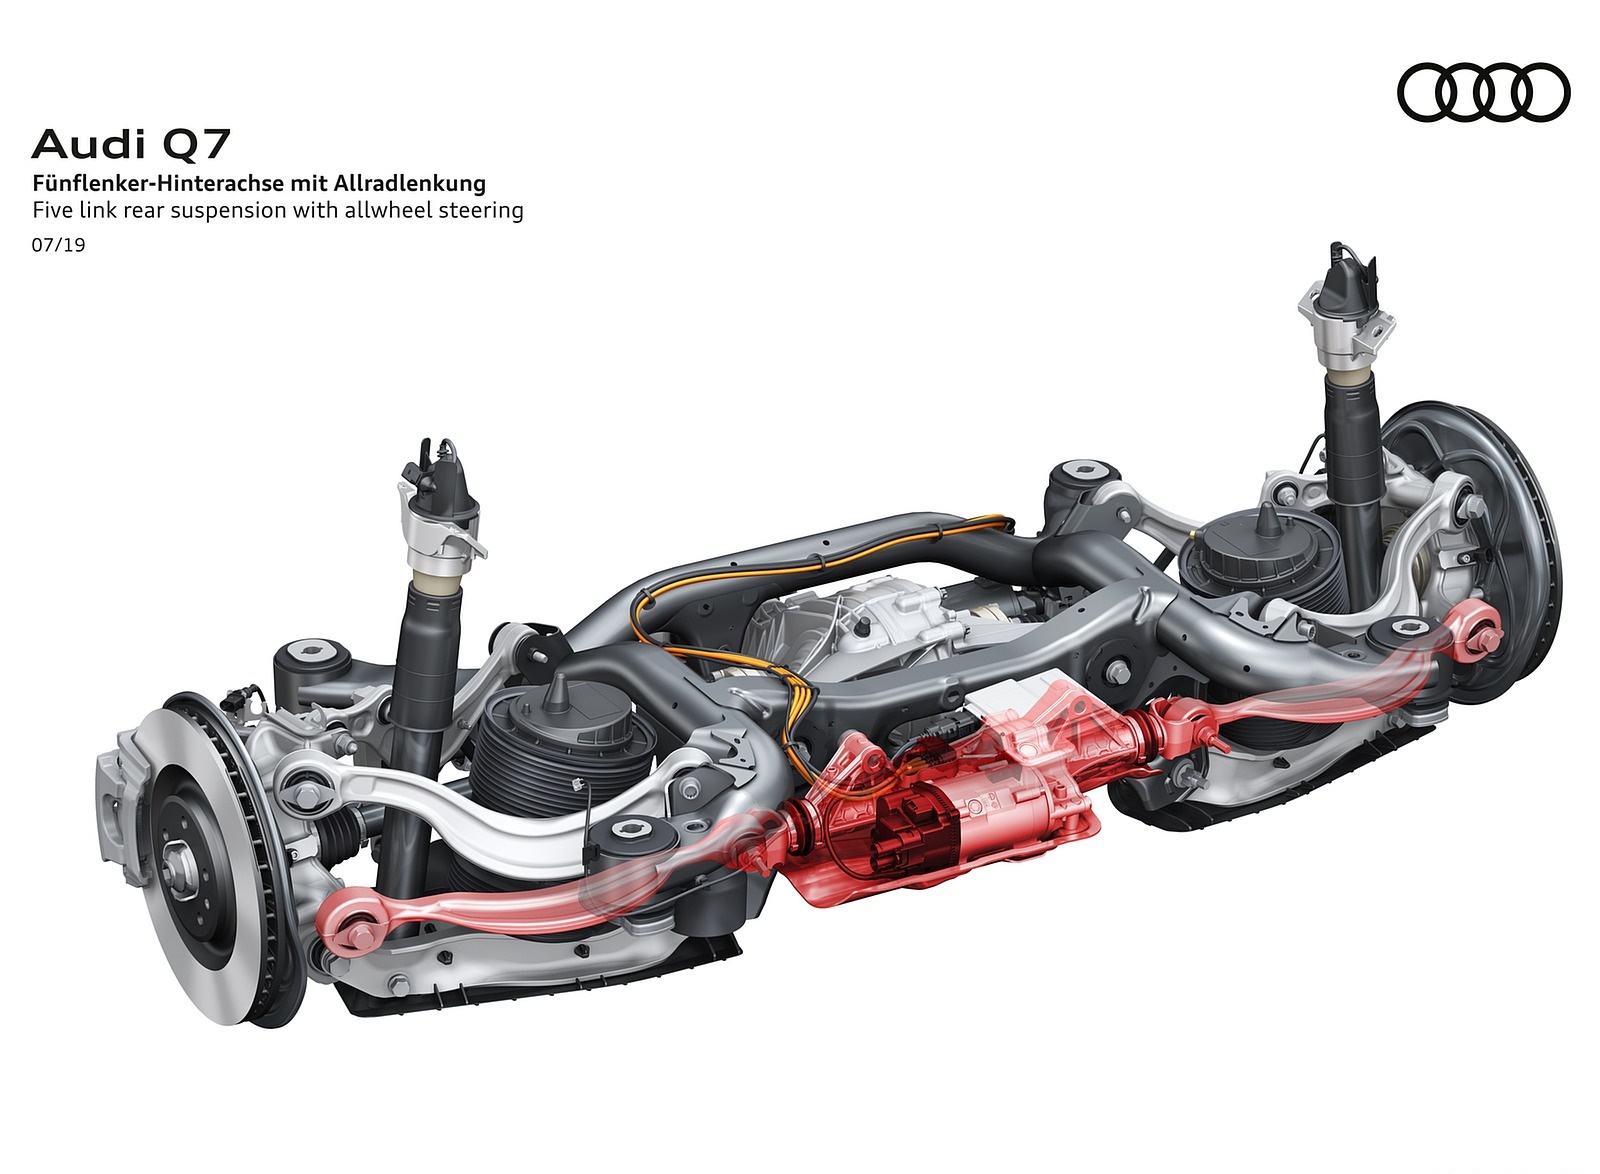 2020 Audi Q7 Five link rear suspension with allwheel steering Wallpapers #132 of 158